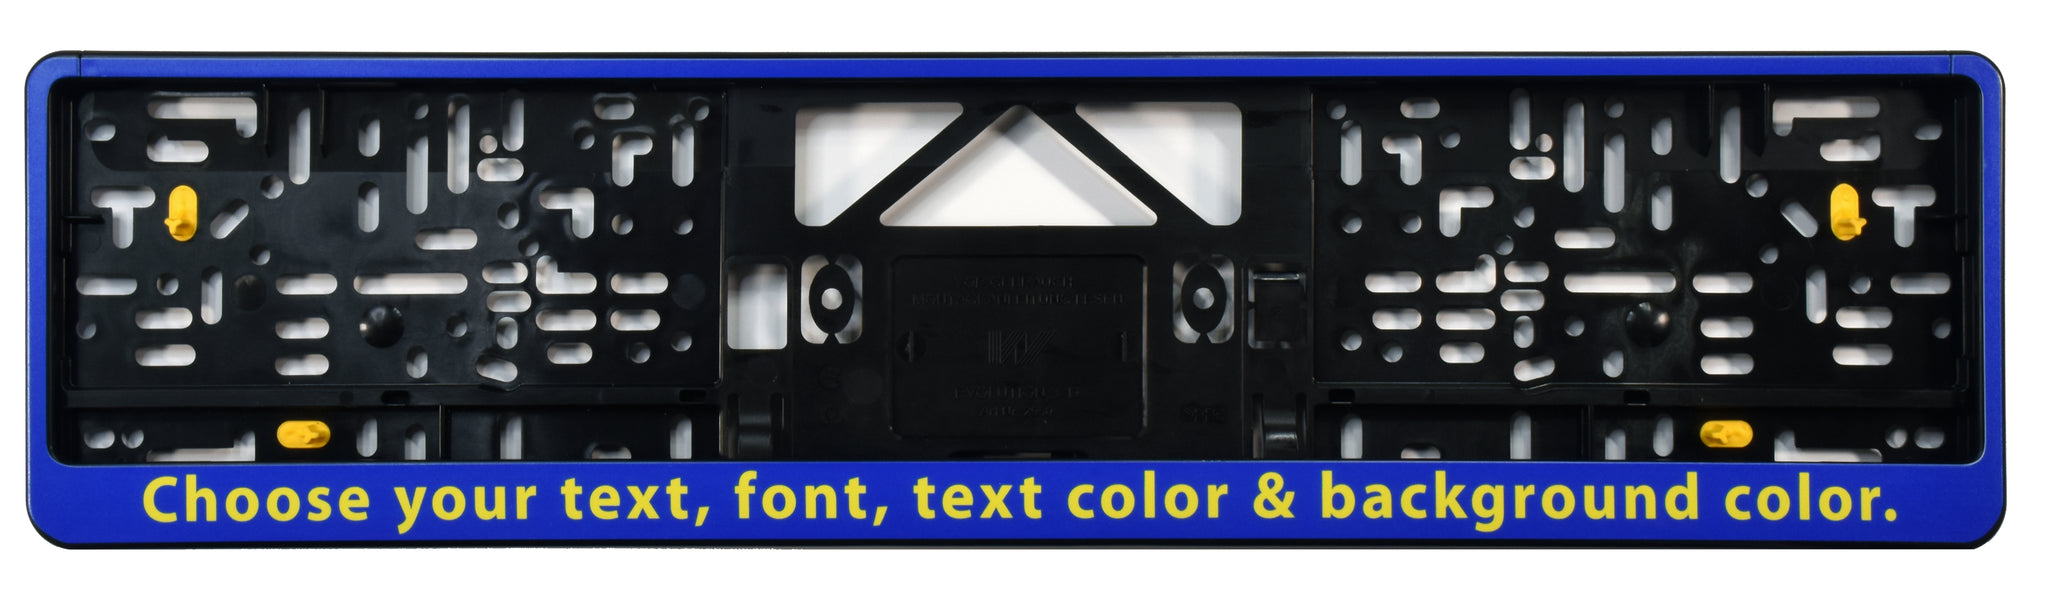 INSTAGRAM Name Reflective Personalized European License Number Plate Frame  Holder, Car Accessories 